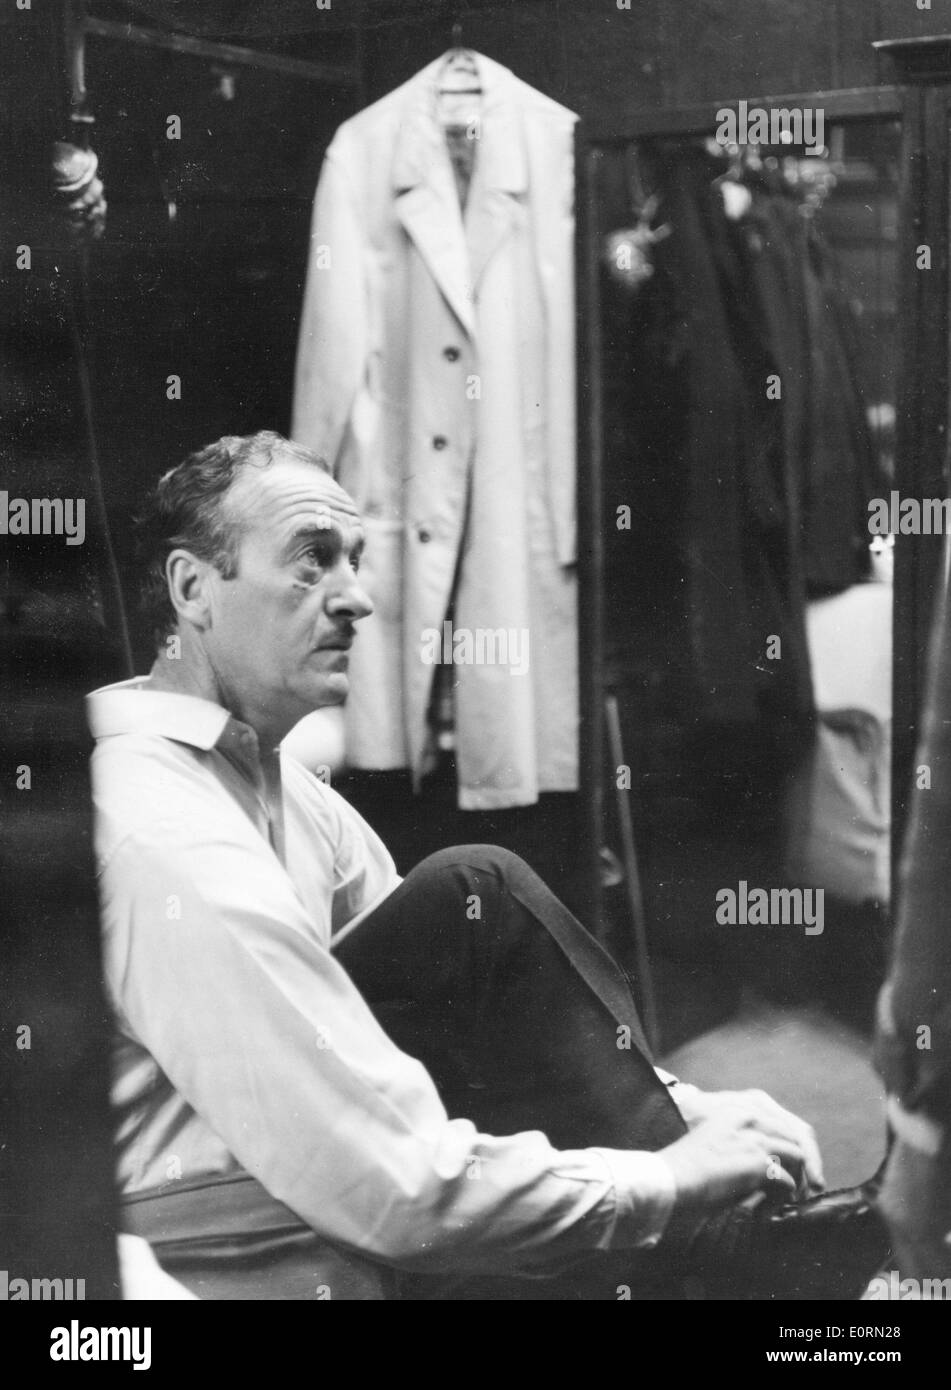 Actor David Niven sitting in his dressing room Stock Photo